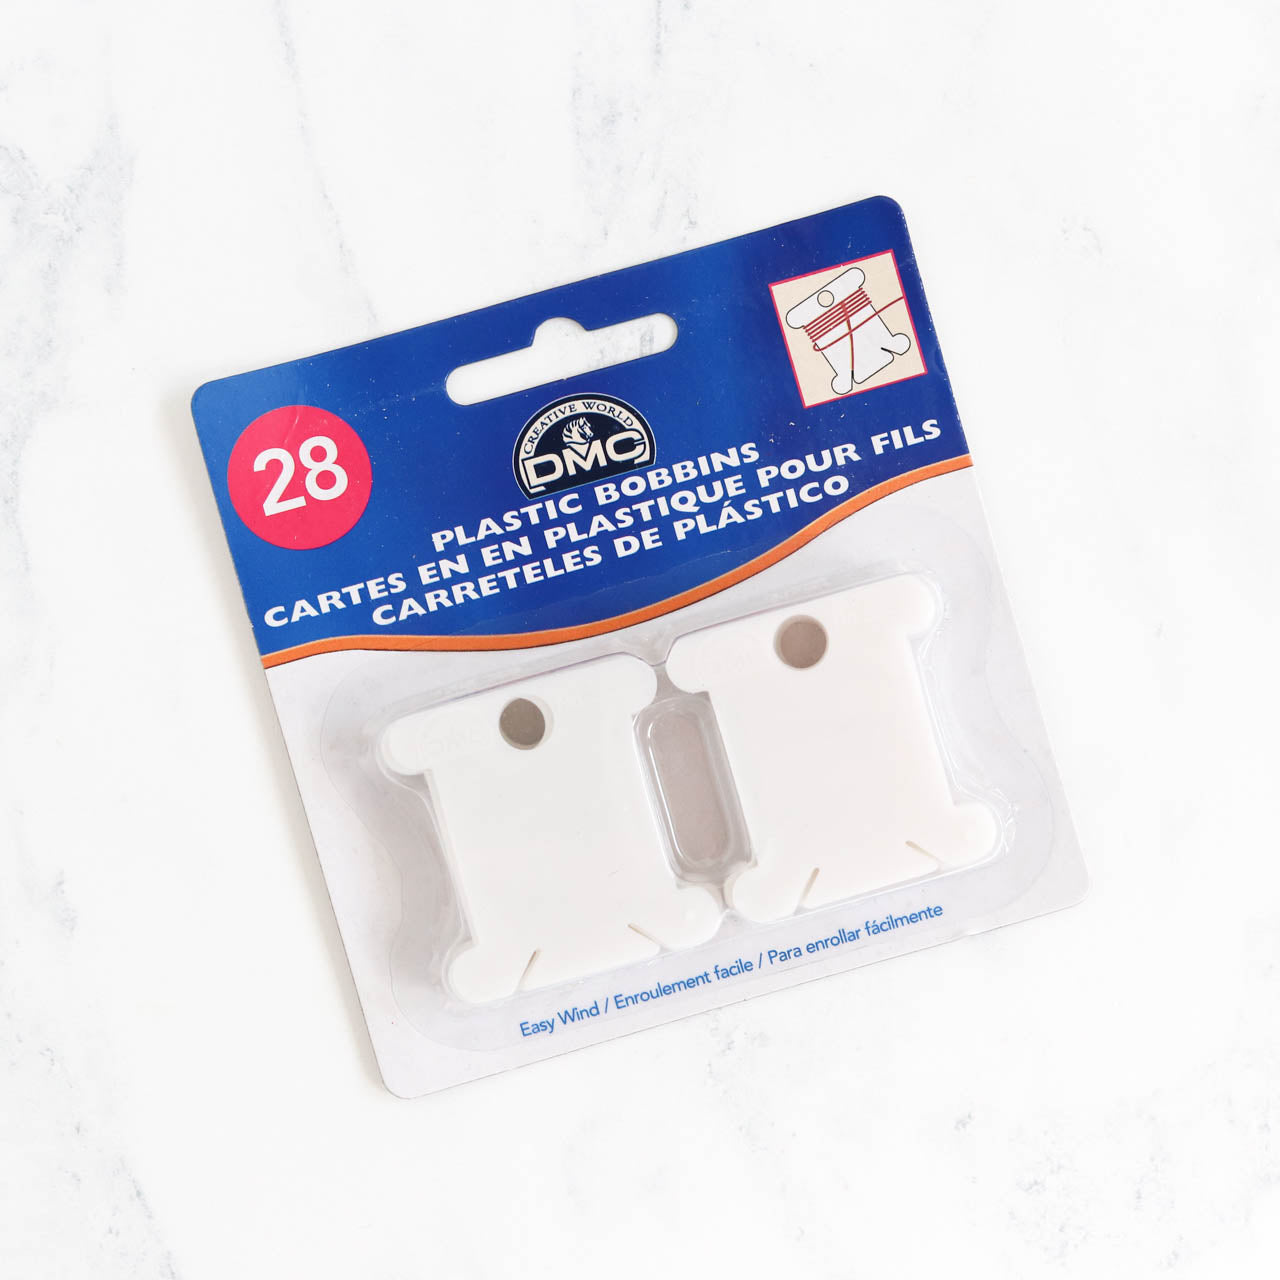 90 PK Plastic Embroidery Floss Cards BobbiN Labels for Cross